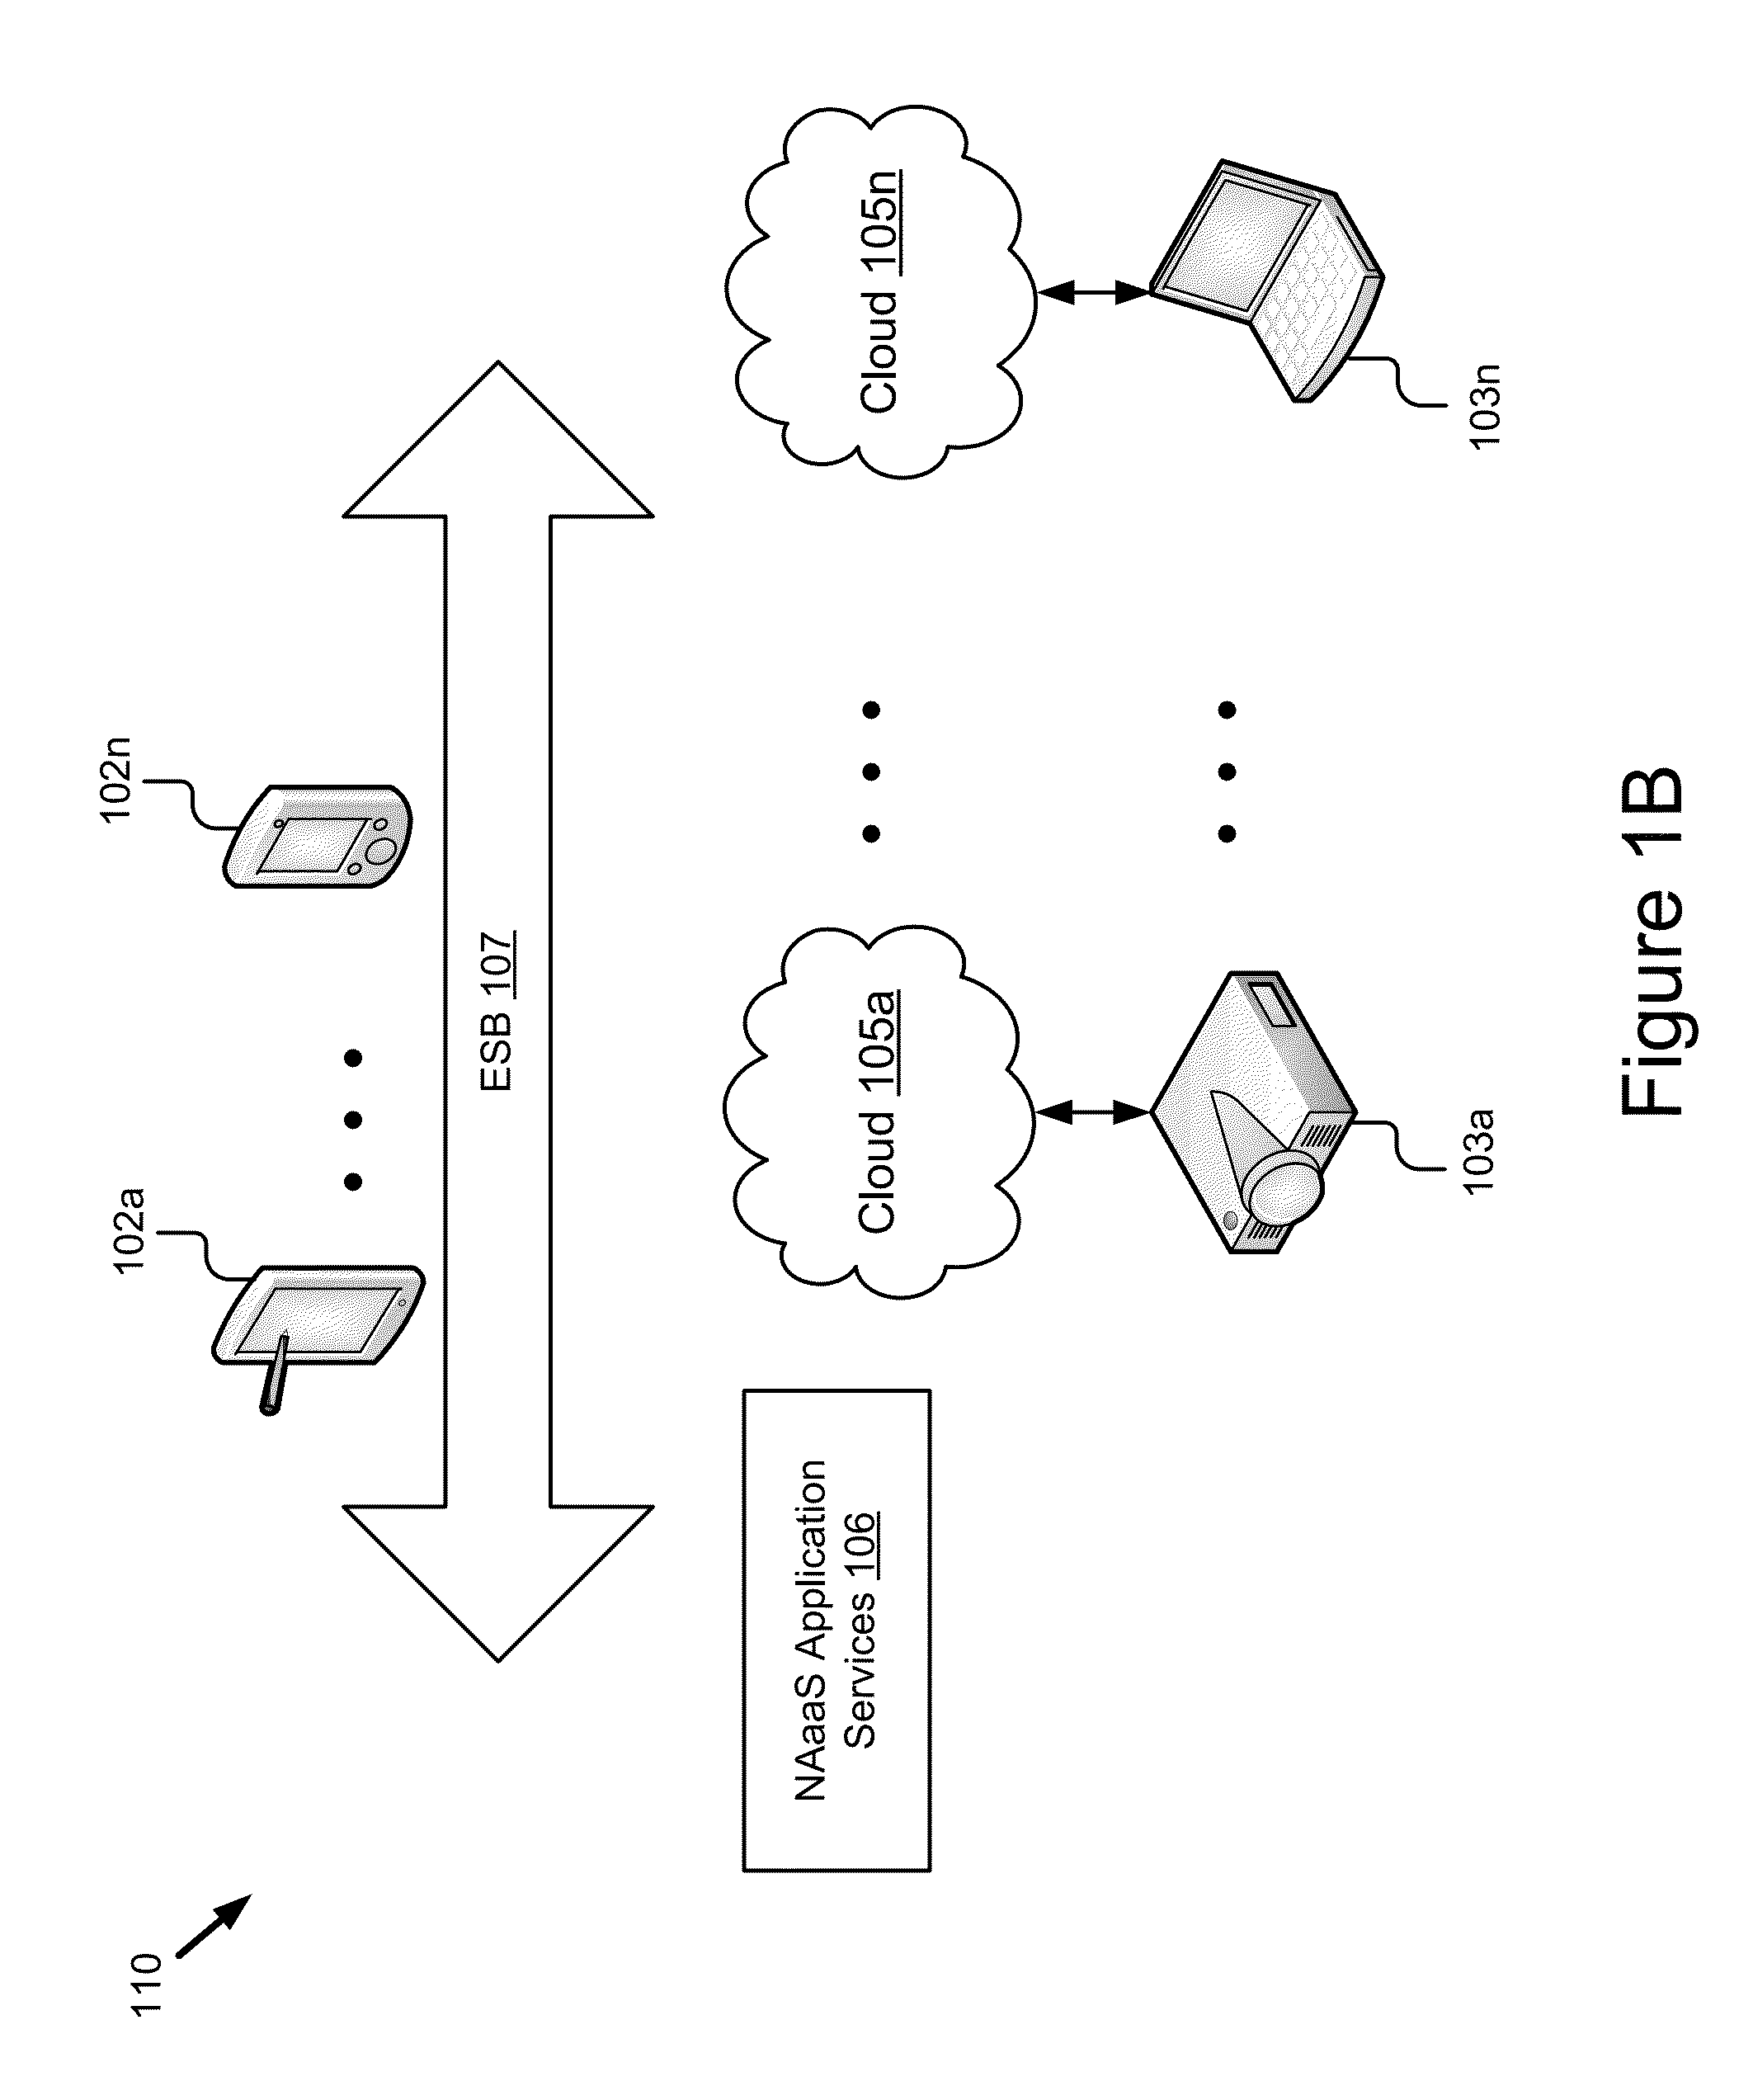 Network Appliance Architecture for Unified Communication Services